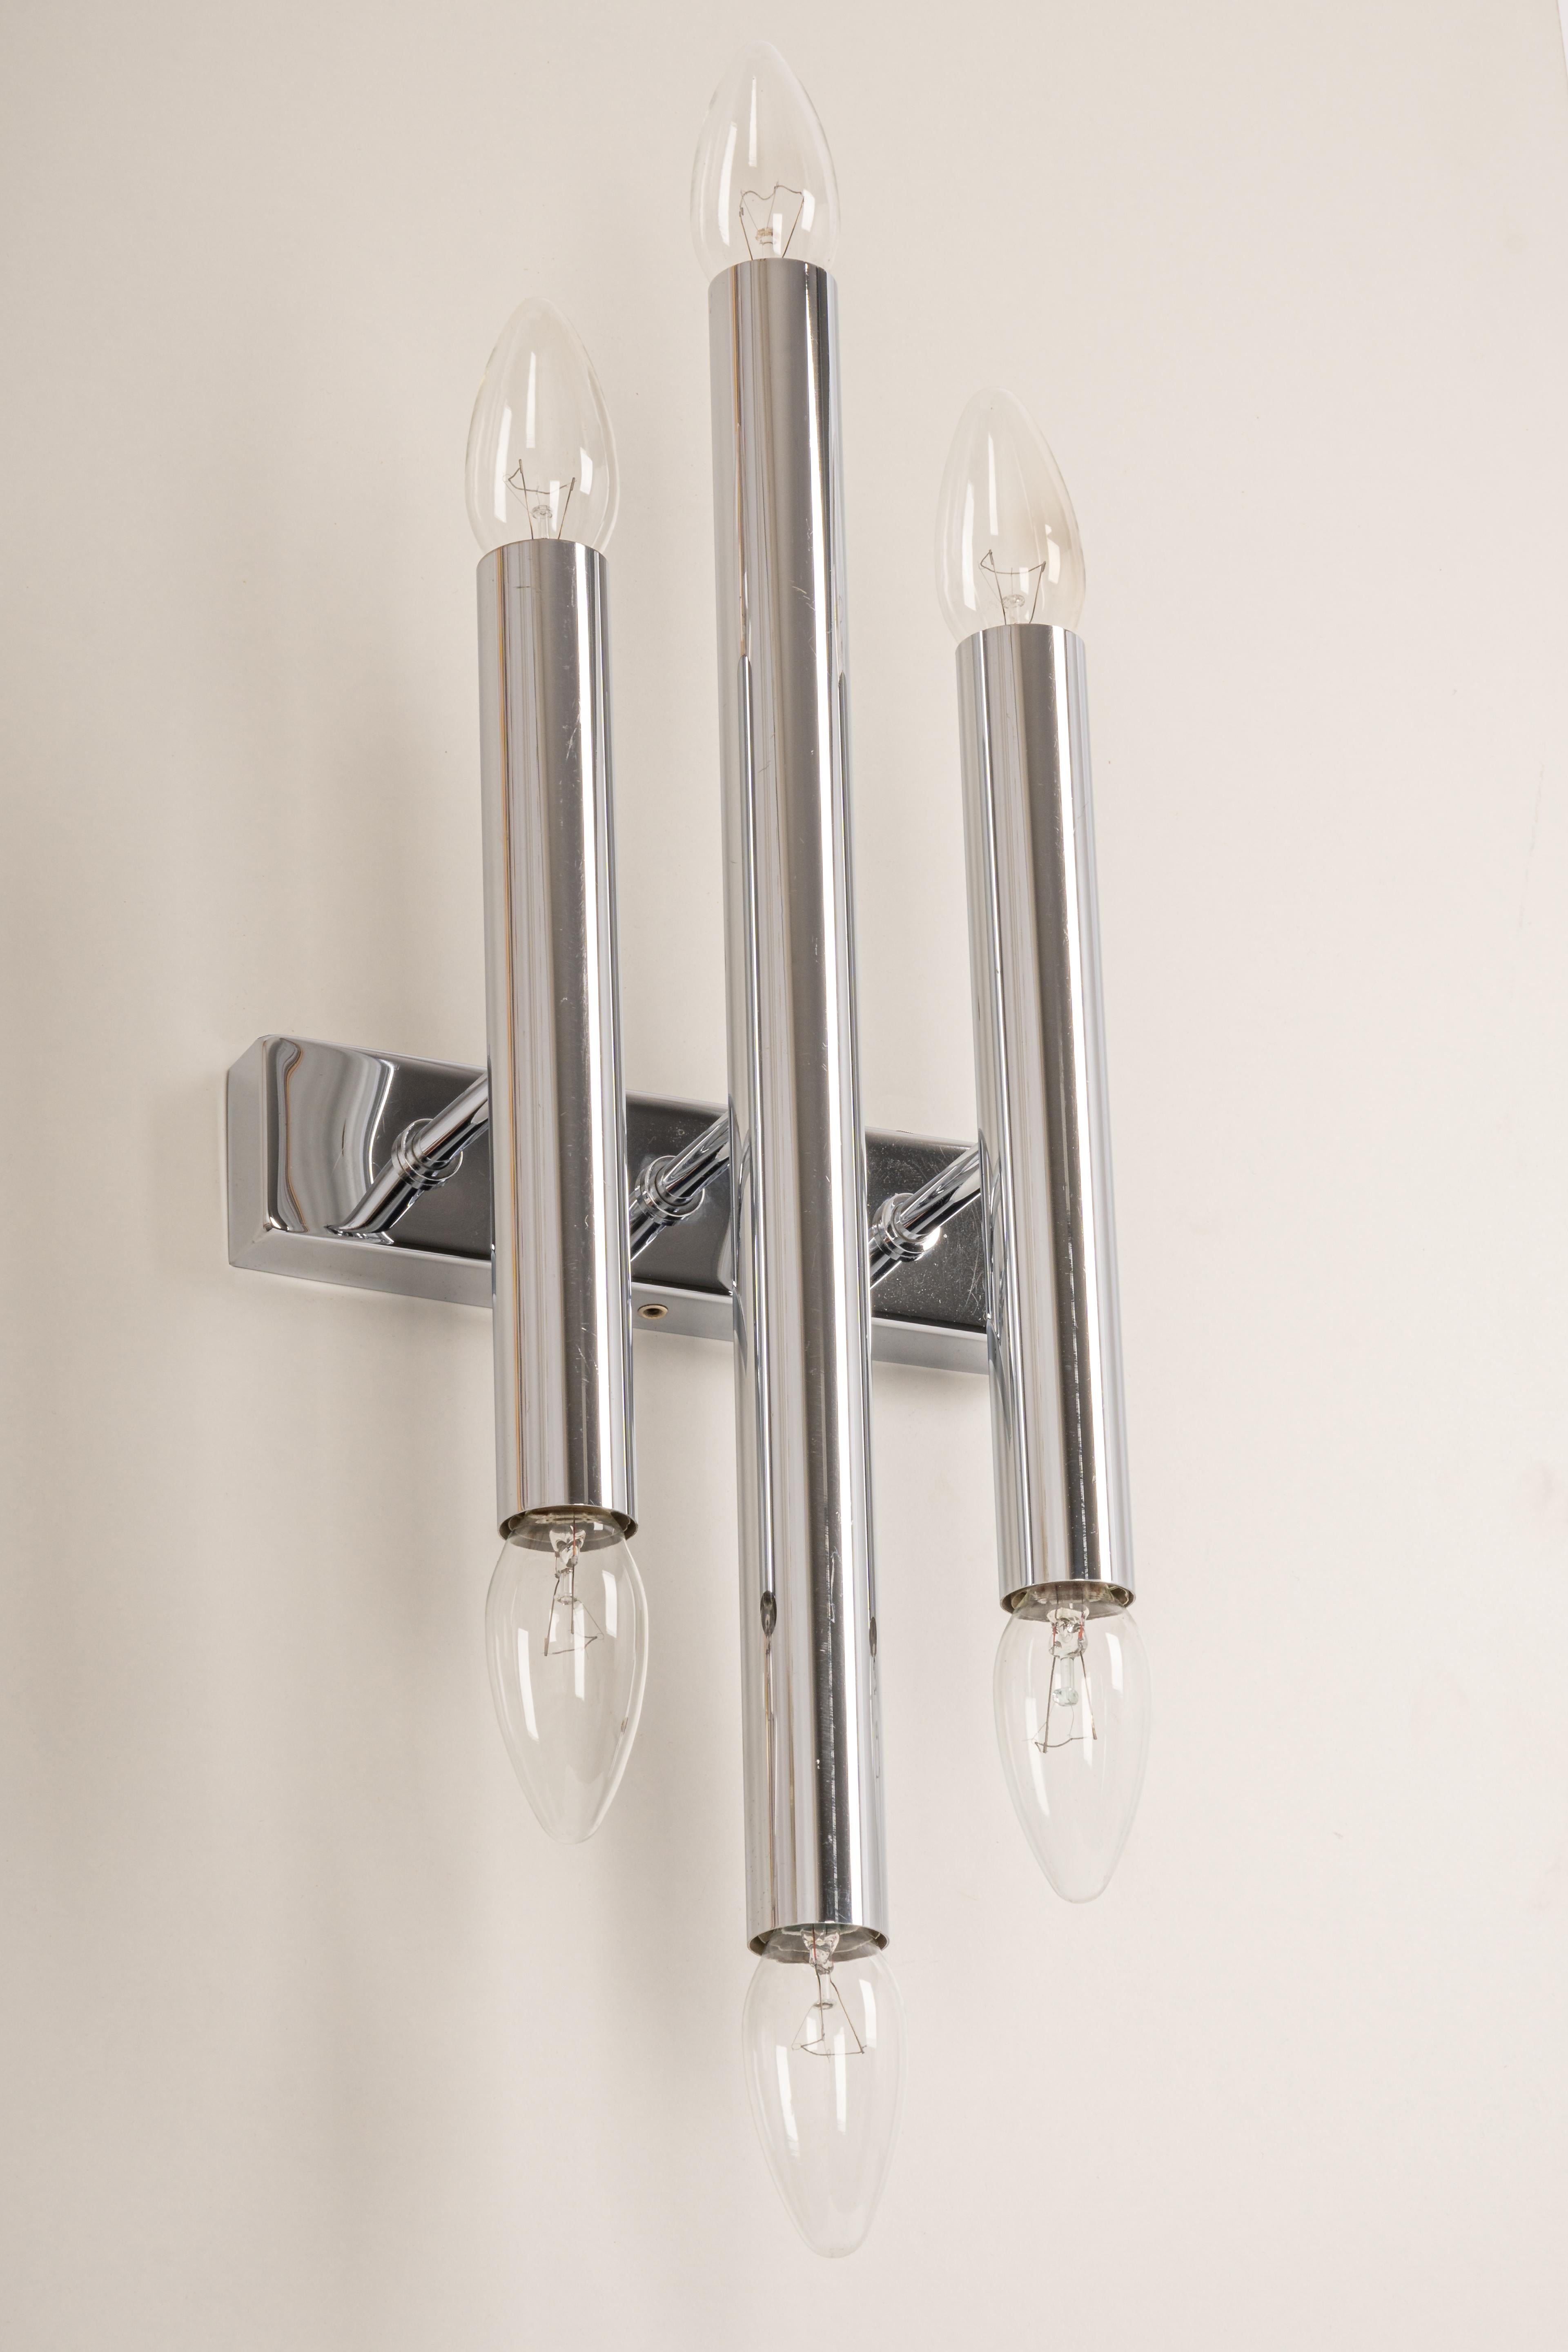 Pair of Large Italian Chrome Wall Sconces Sciolari Style, 1970s For Sale 4